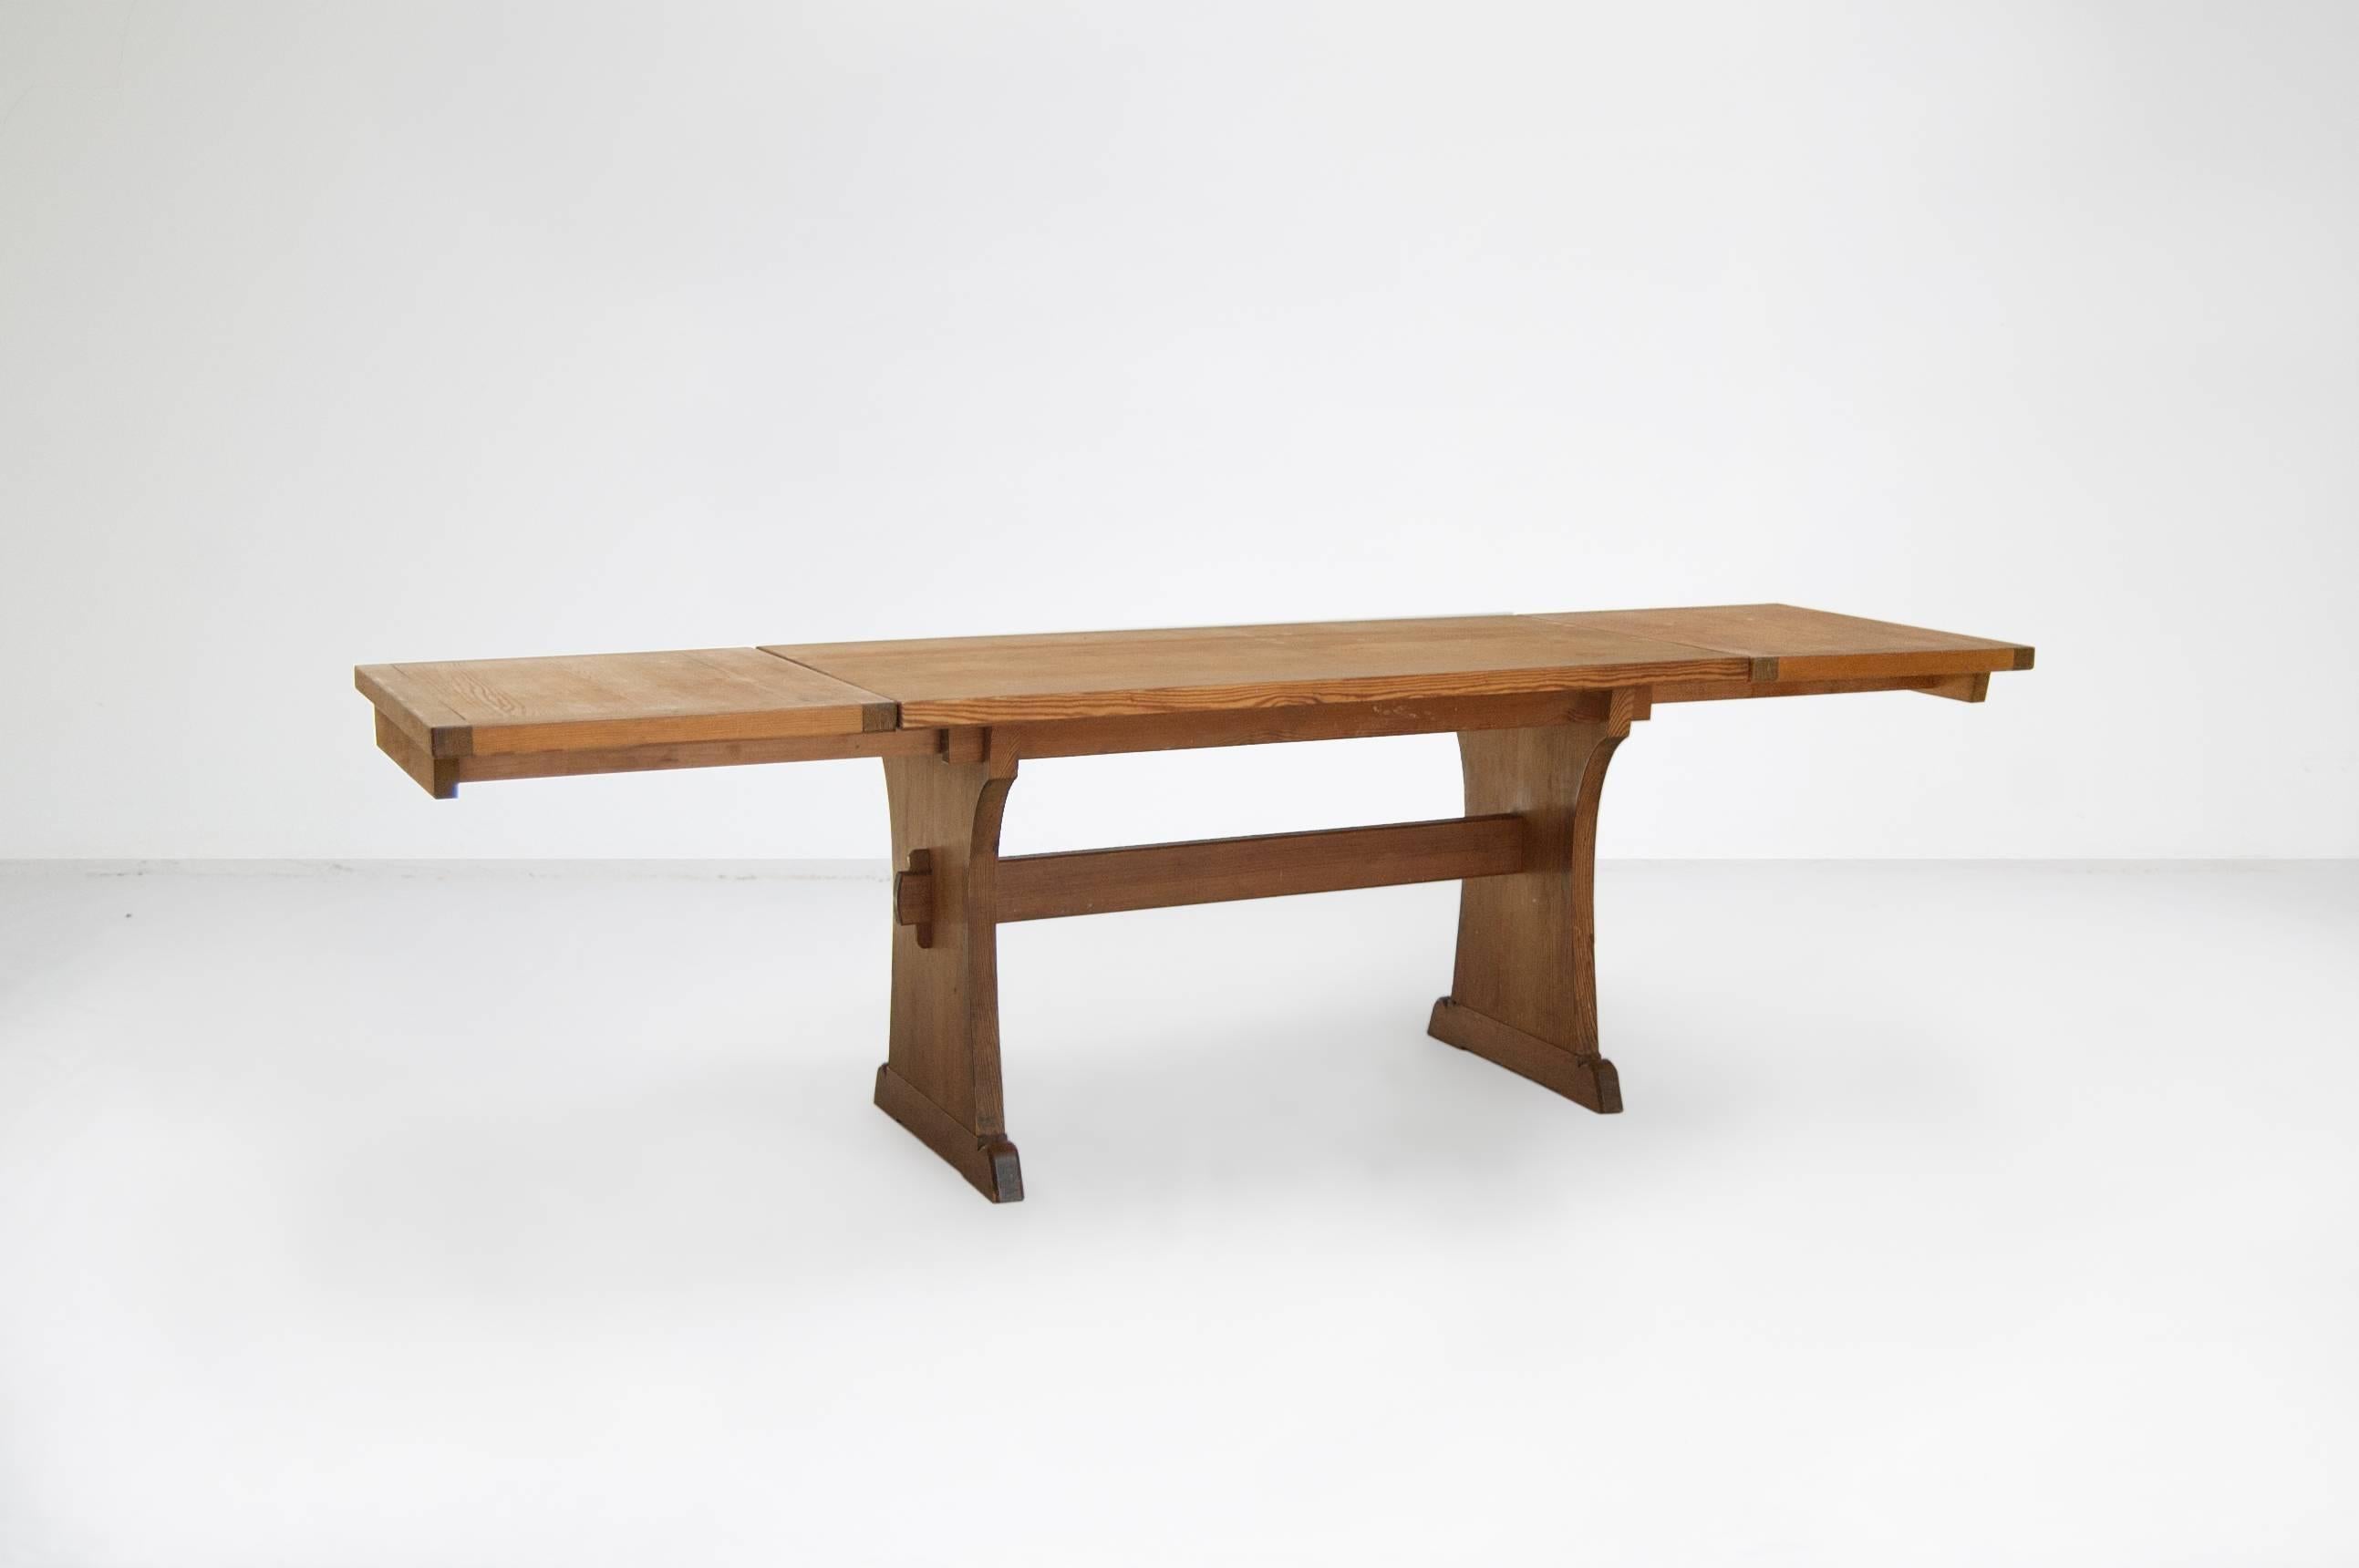 Axel Einar Hjorth (1888-1959) (Atributed).

Dining table.
Manufactured by Nordiska Kompaniet.
Sweden, 1940s.
Solid pine.

Measurements:
140 cm (260 cm extended) x 70 cm x 74 H cm.
55.11 in (102 in extended) x 27.55 in x 29.1 H in.